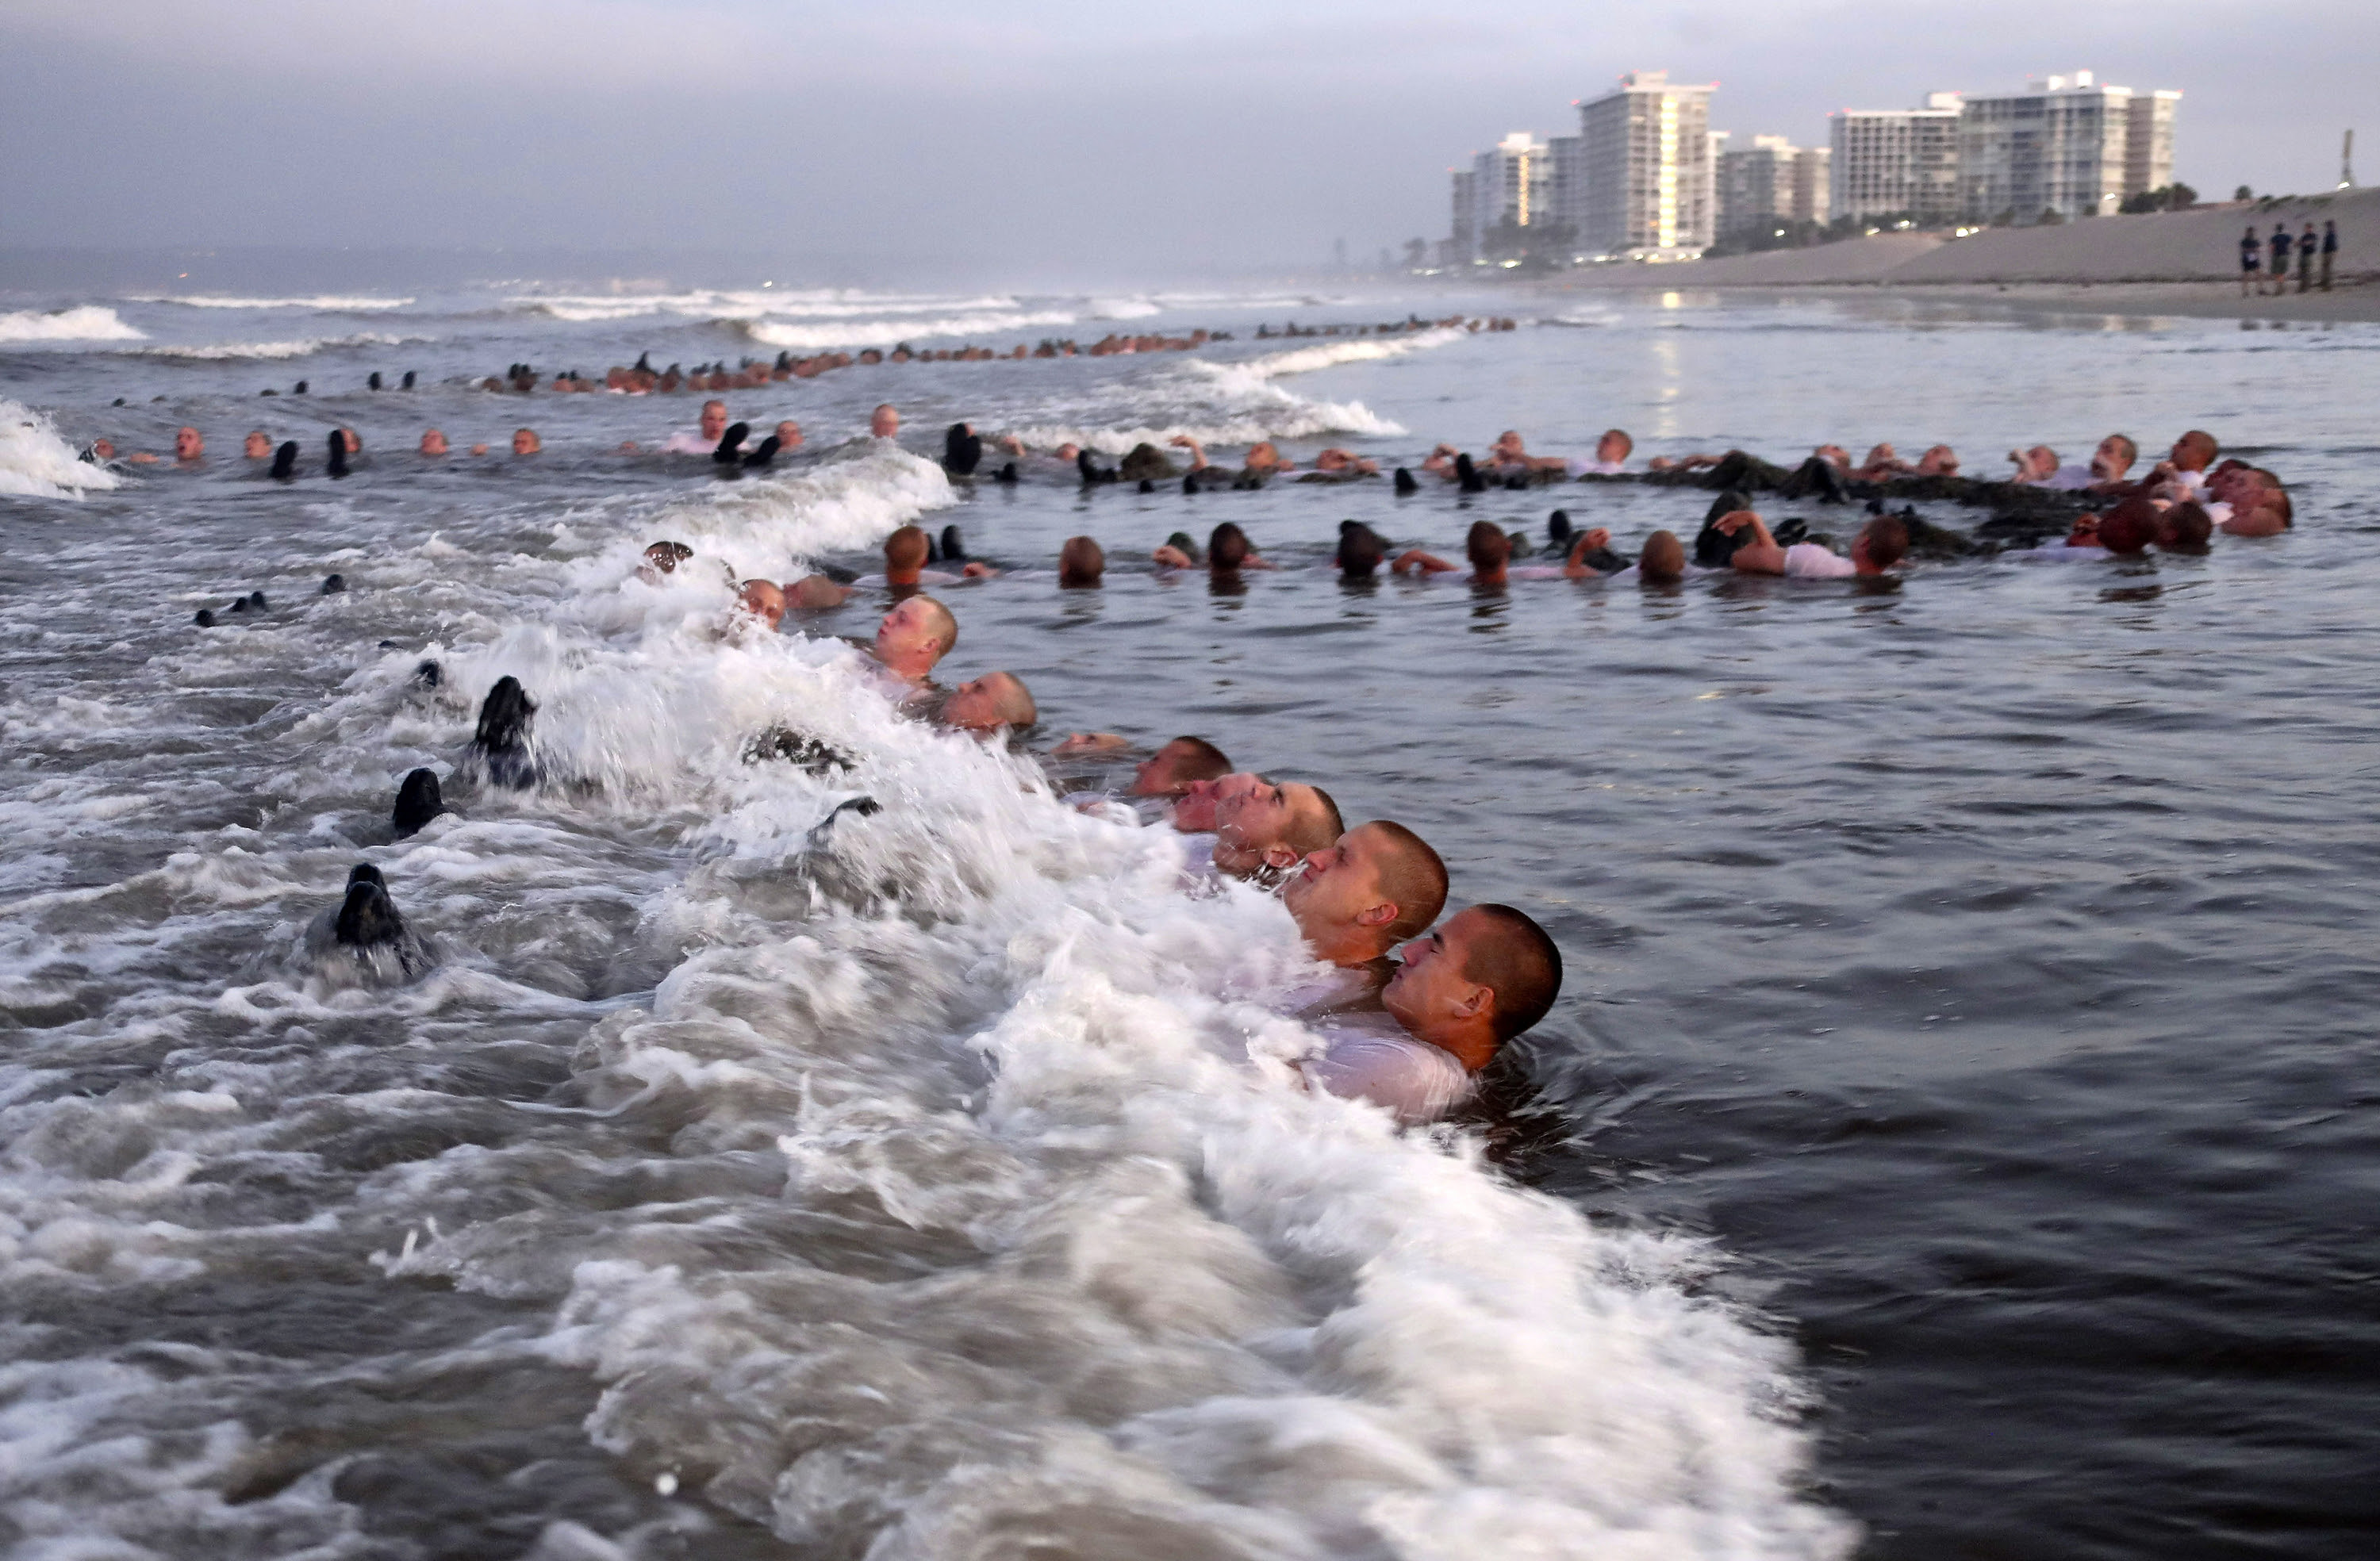 U.S. Navy SEAL candidates, participate in ''surf immersion'' during Basic Underwater Demolition/SEAL (BUD/S) training at the Naval Special Warfare (NSW) Center in Coronado, Calif., on May 4, 2020.